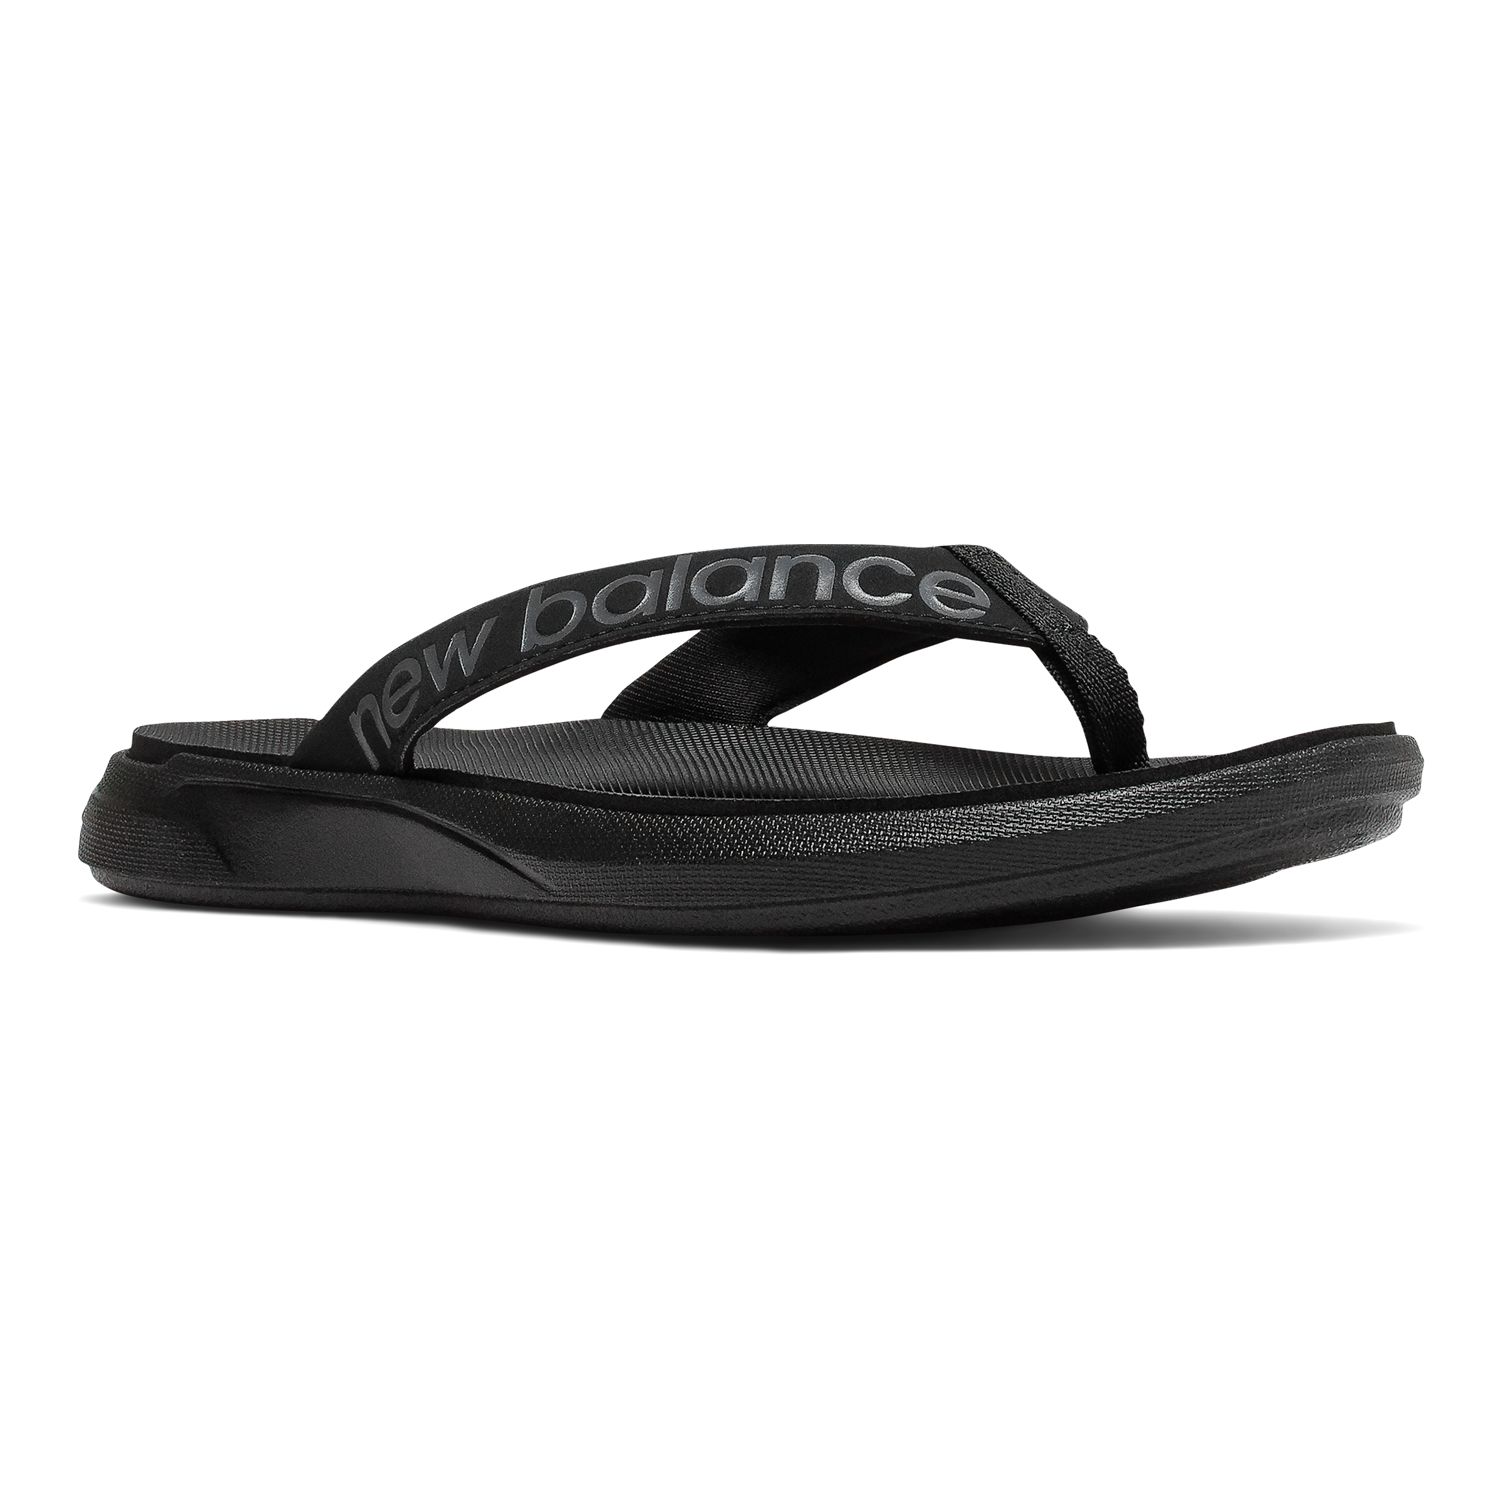 clarks active air sandals magnetic